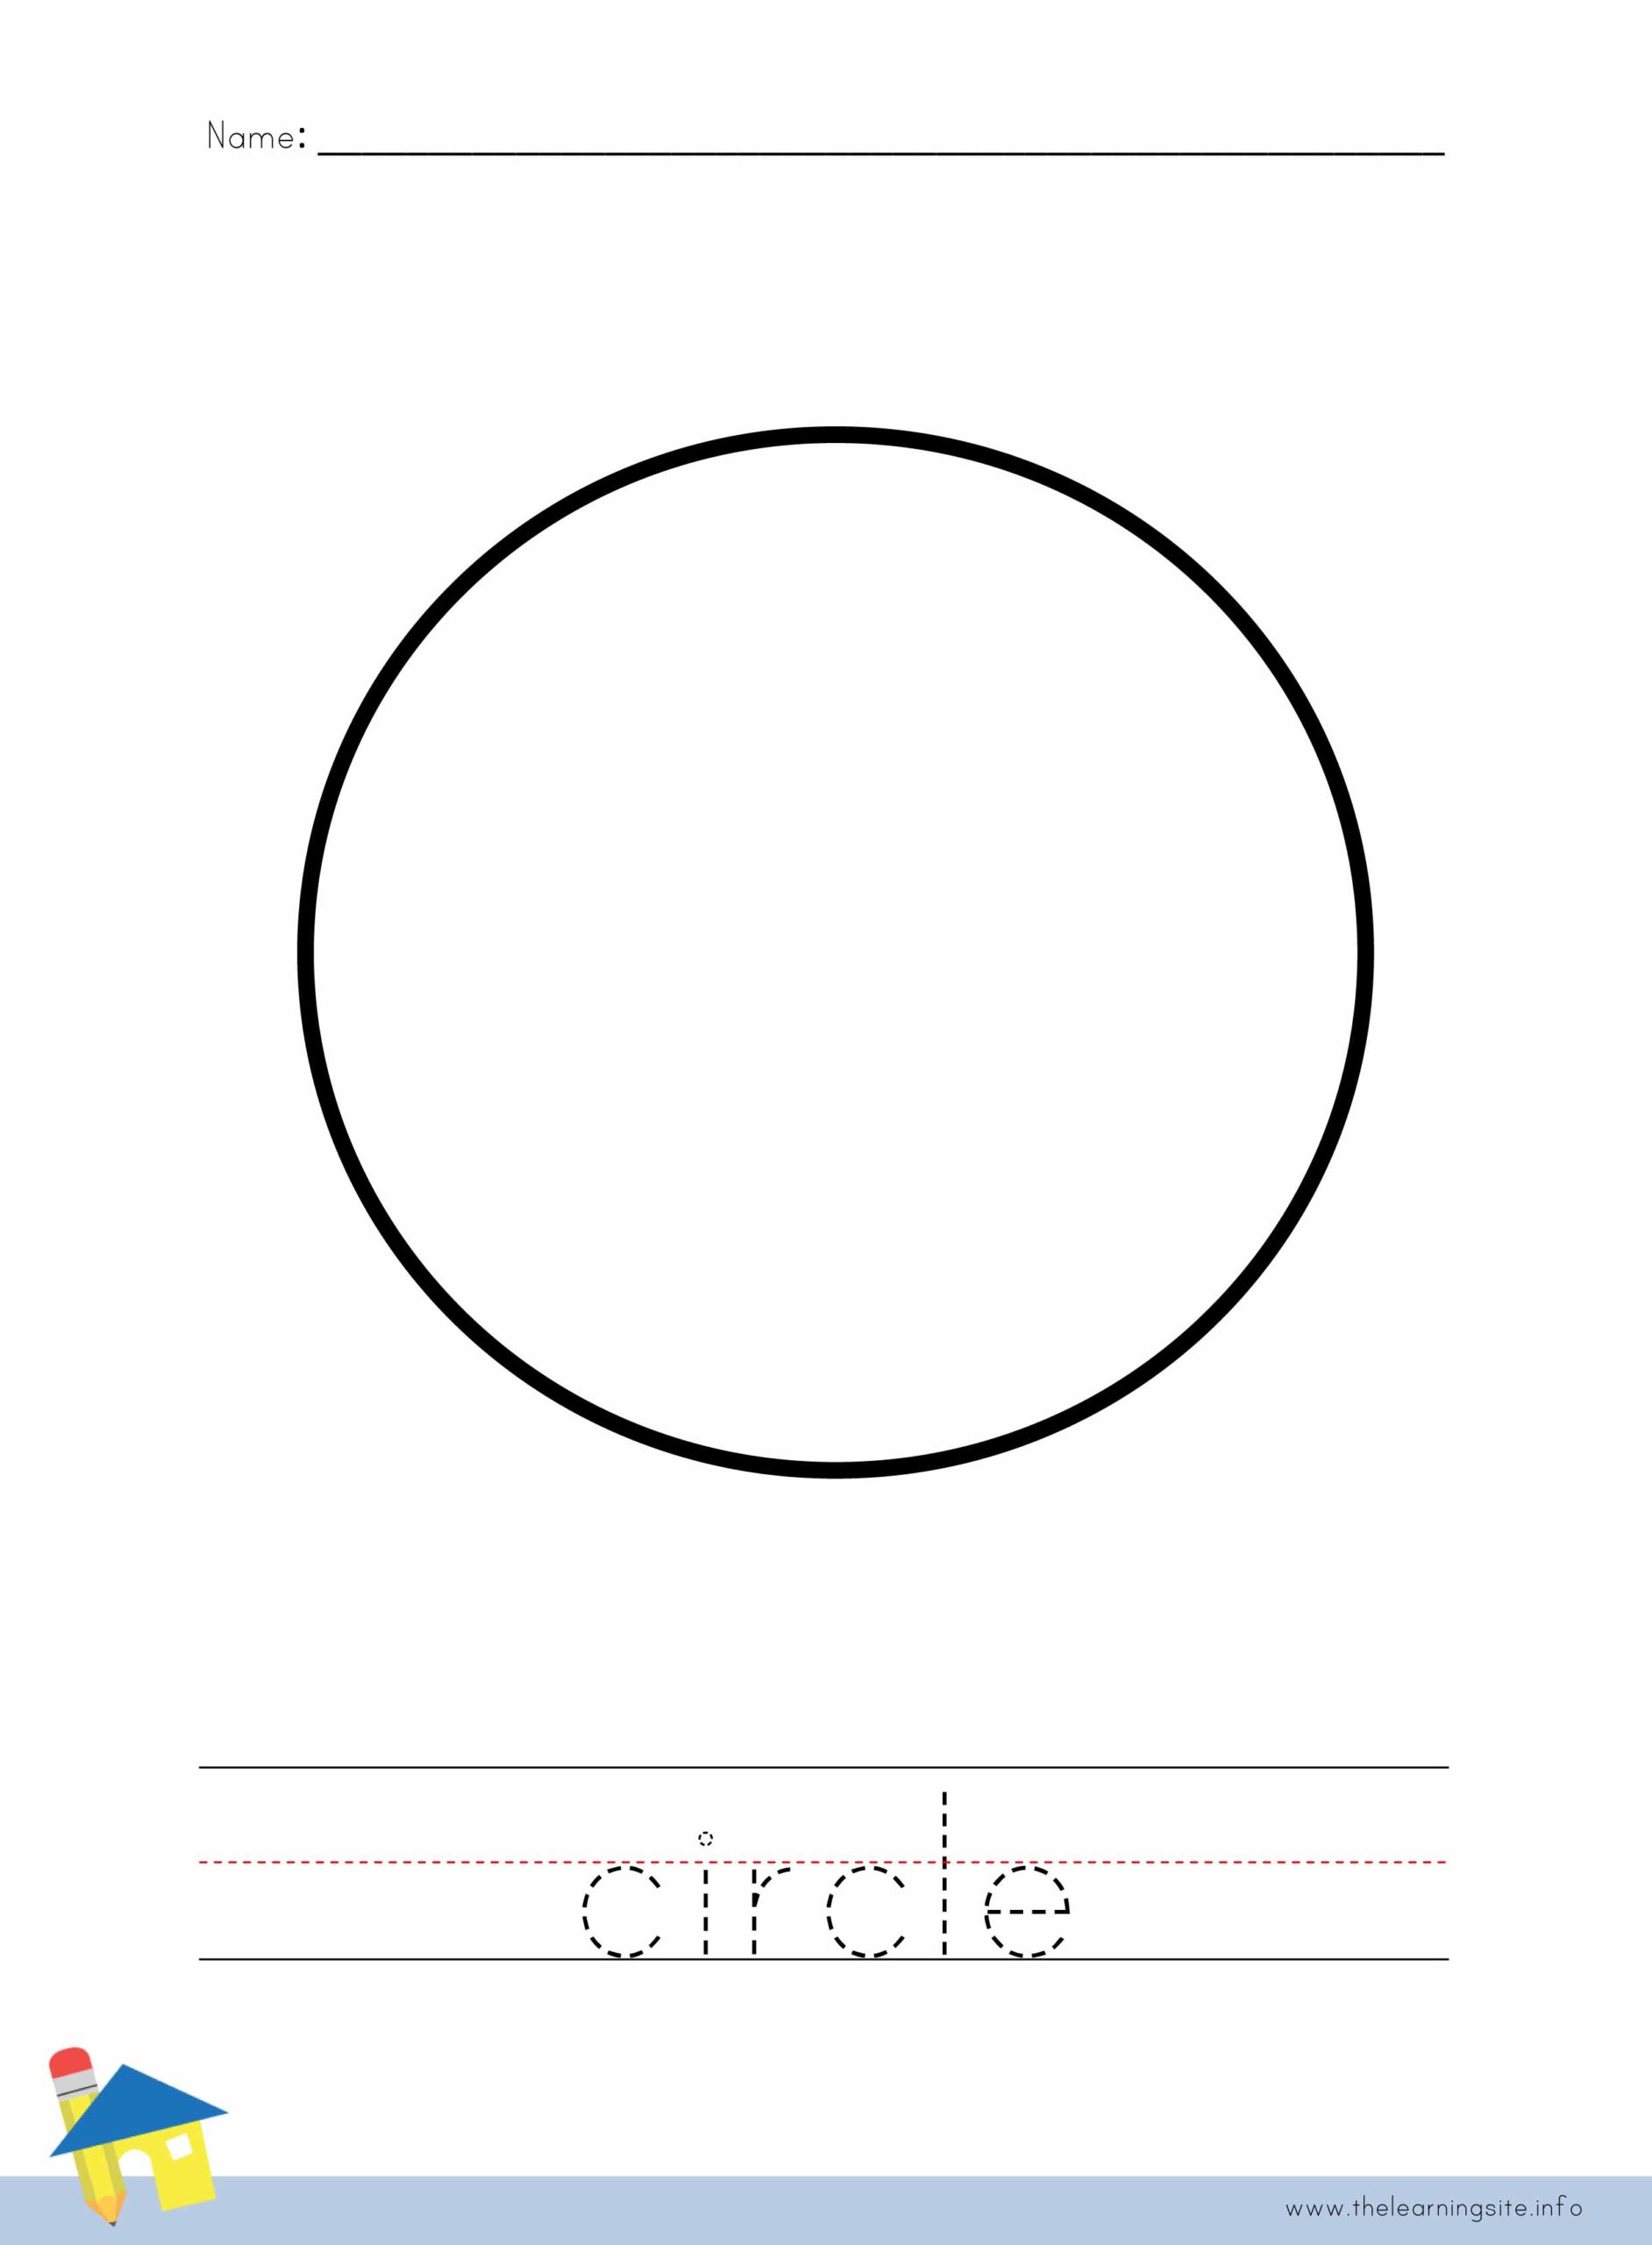 circle-coloring-worksheet-the-learning-site